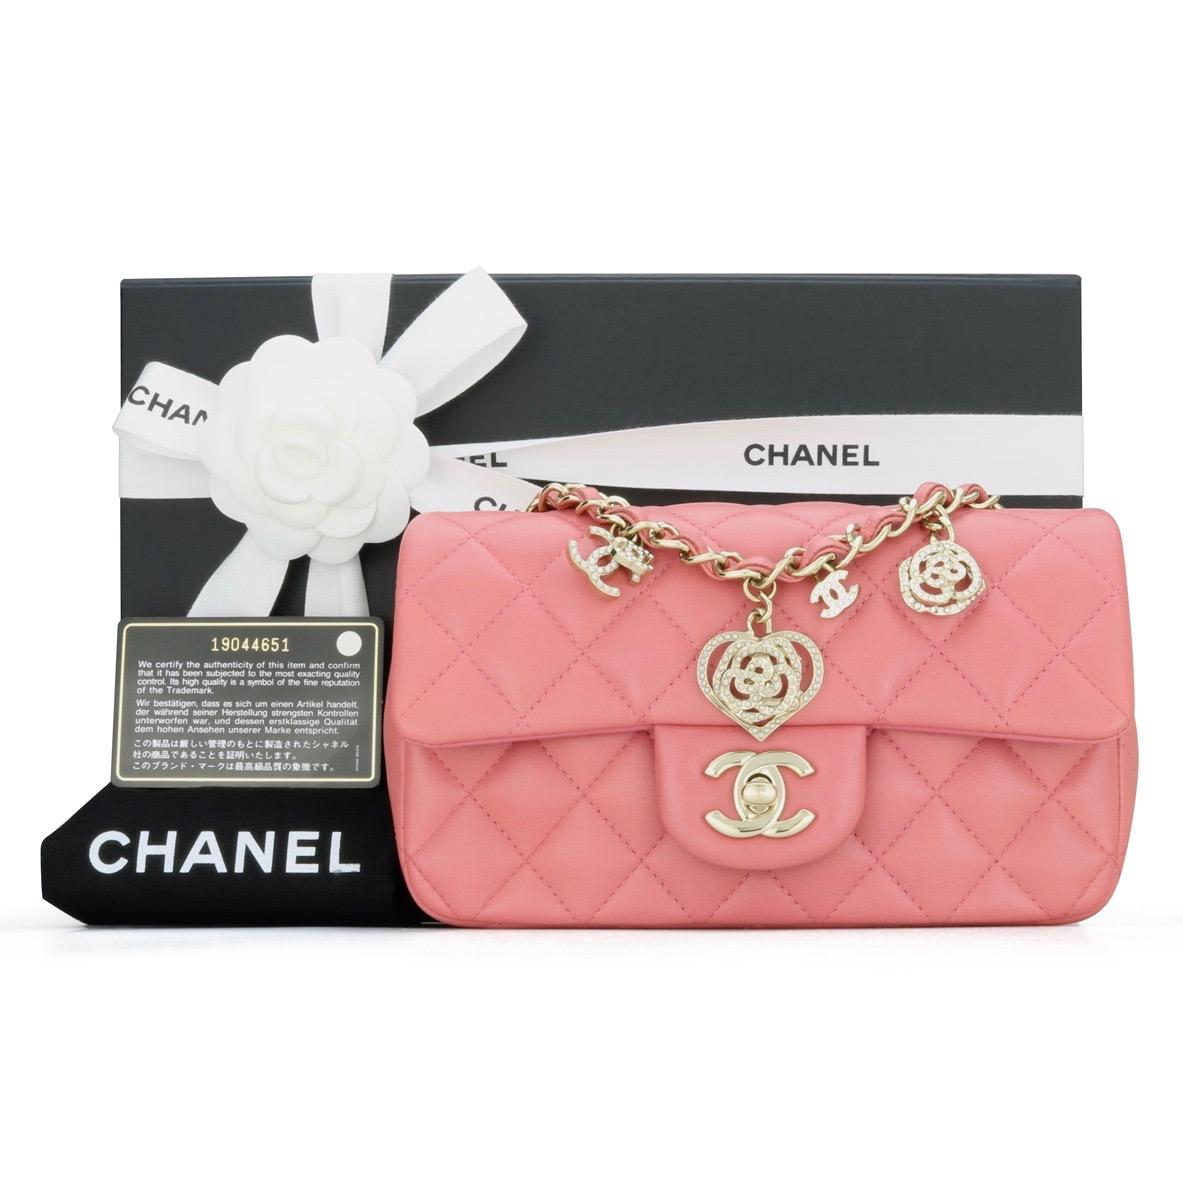 CHANEL Rectangular Mini Valentine Charms Bag Pink Lambskin with Light Gold Hardware 2014 – 14P Limited Edition.

This stunning bag is still in very good condition; it still holds its original shape, and the hardware is still shiny. It is a gorgeous,